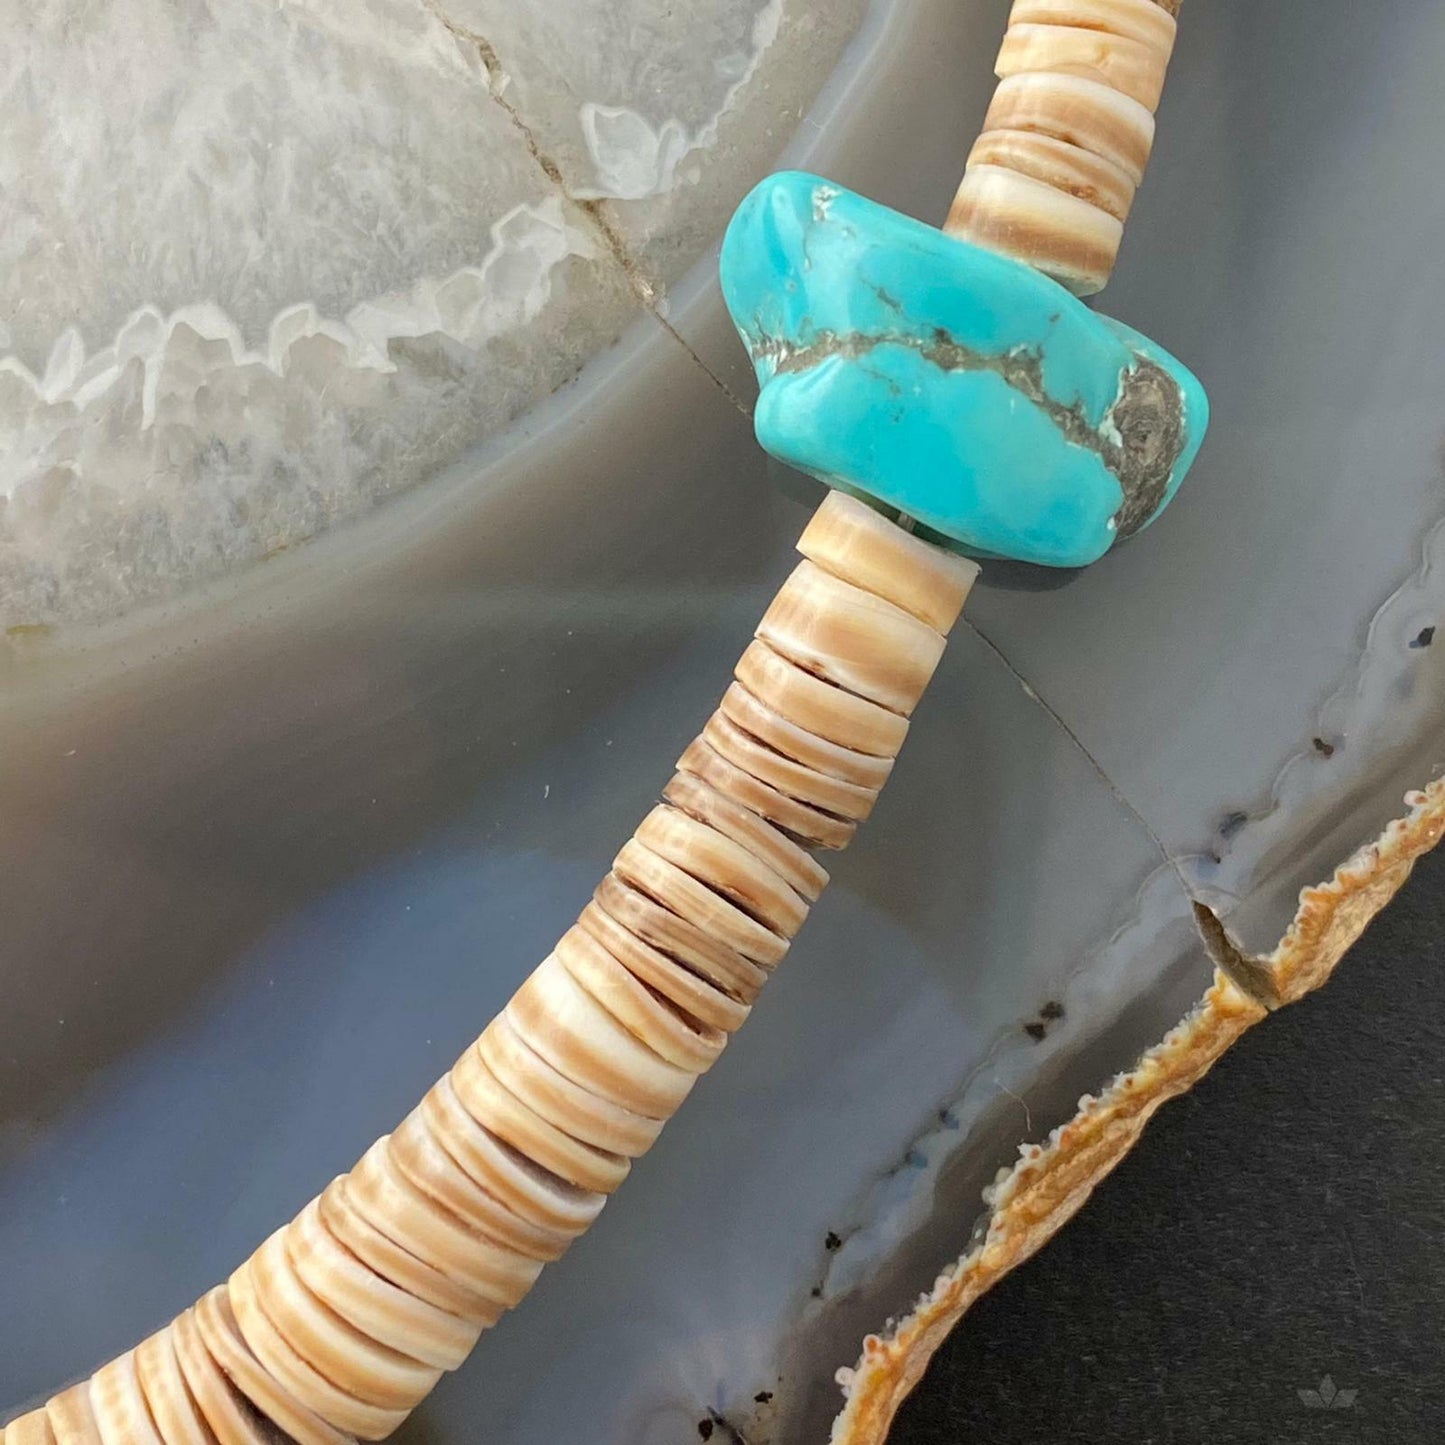 Vintage Native American Heishi Sea Shell Disk and Chunky Turquoise Necklace